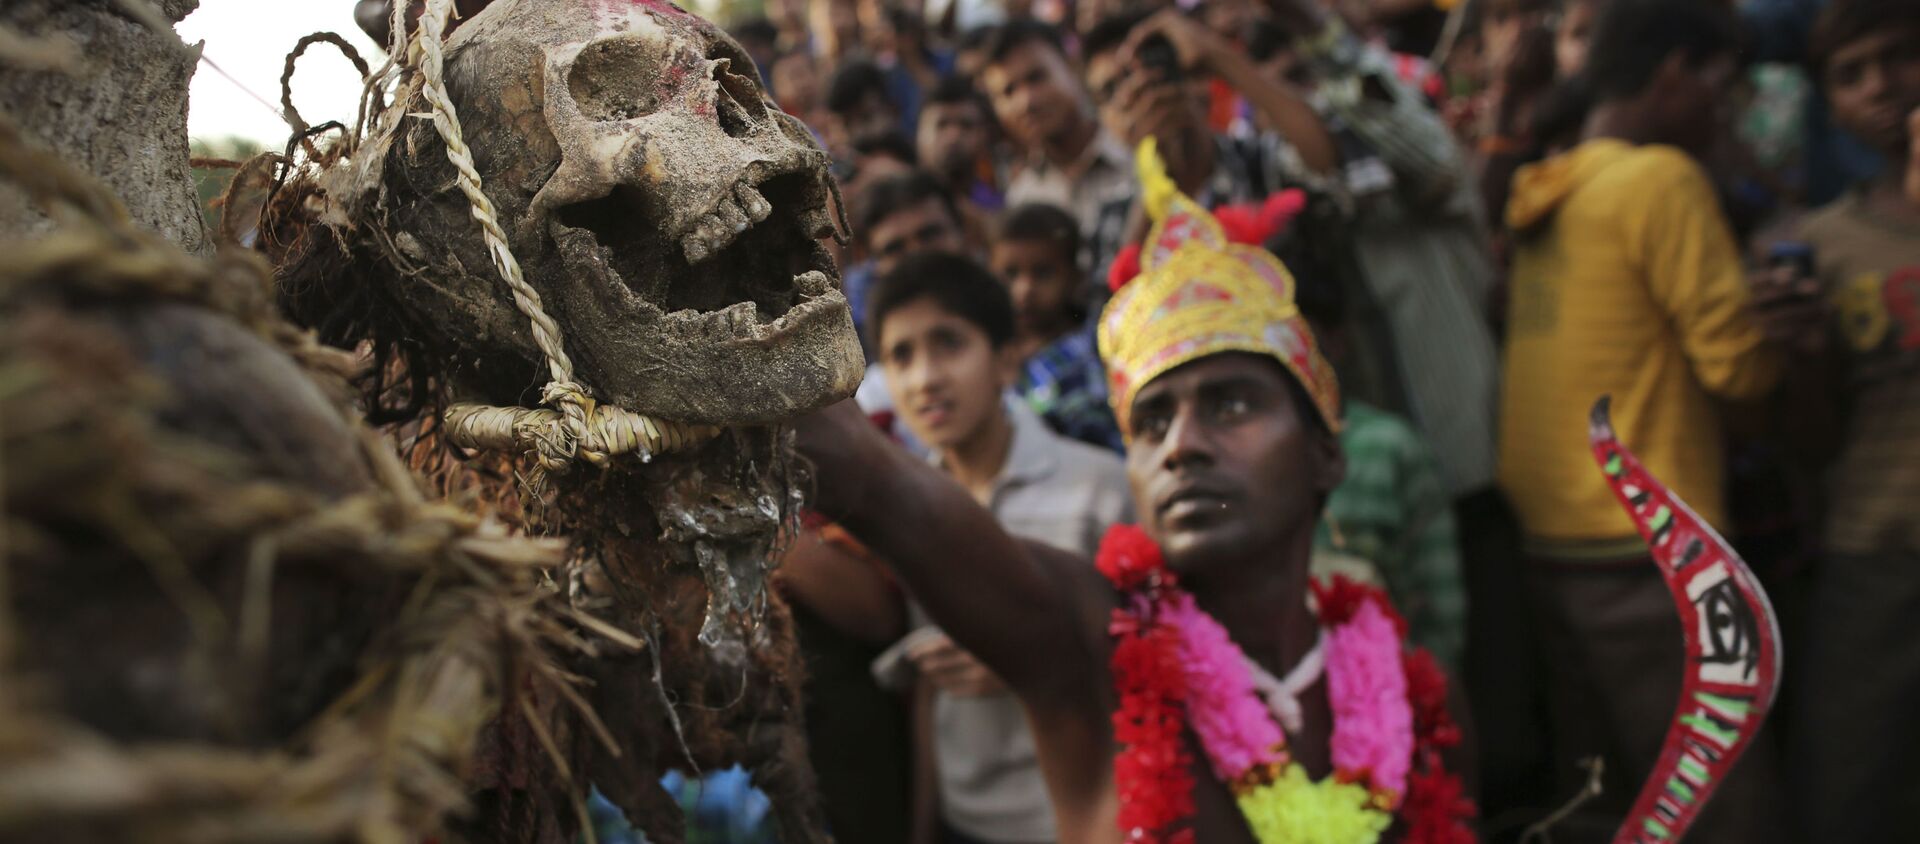 An Indian Hindu devotee hangs a human skull from a tree during a brief ceremony marking Shiva Gajan, in Burdwan district, east of Kokata,in West Bengal, India, Thursday, April 12, 2012 - Sputnik International, 1920, 23.08.2021